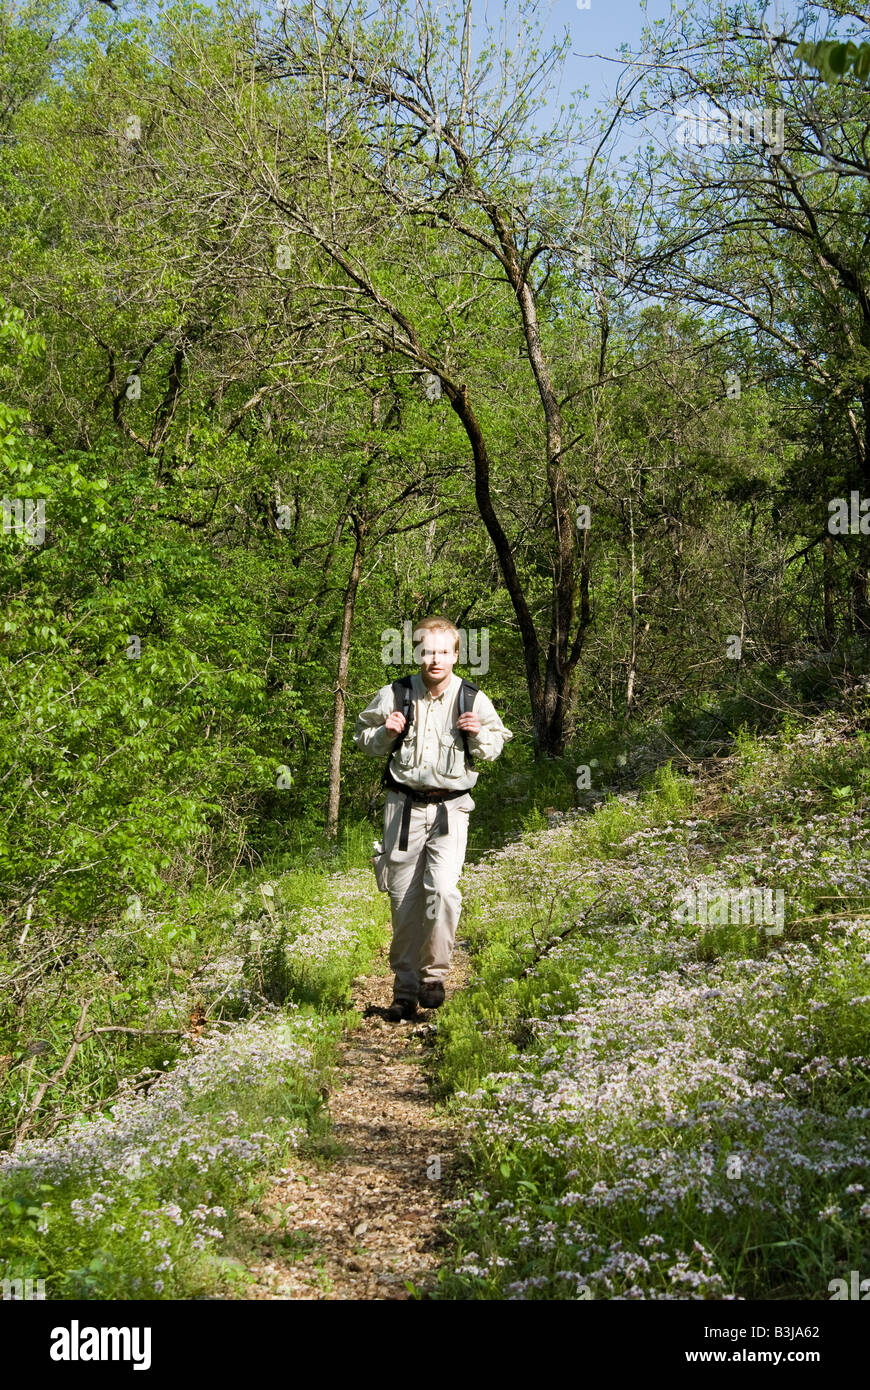 Male hiker in the Ozark Mountains region of Arkansas behind the Tyler Bend Visitors Center on the Buffalo National River Stock Photo